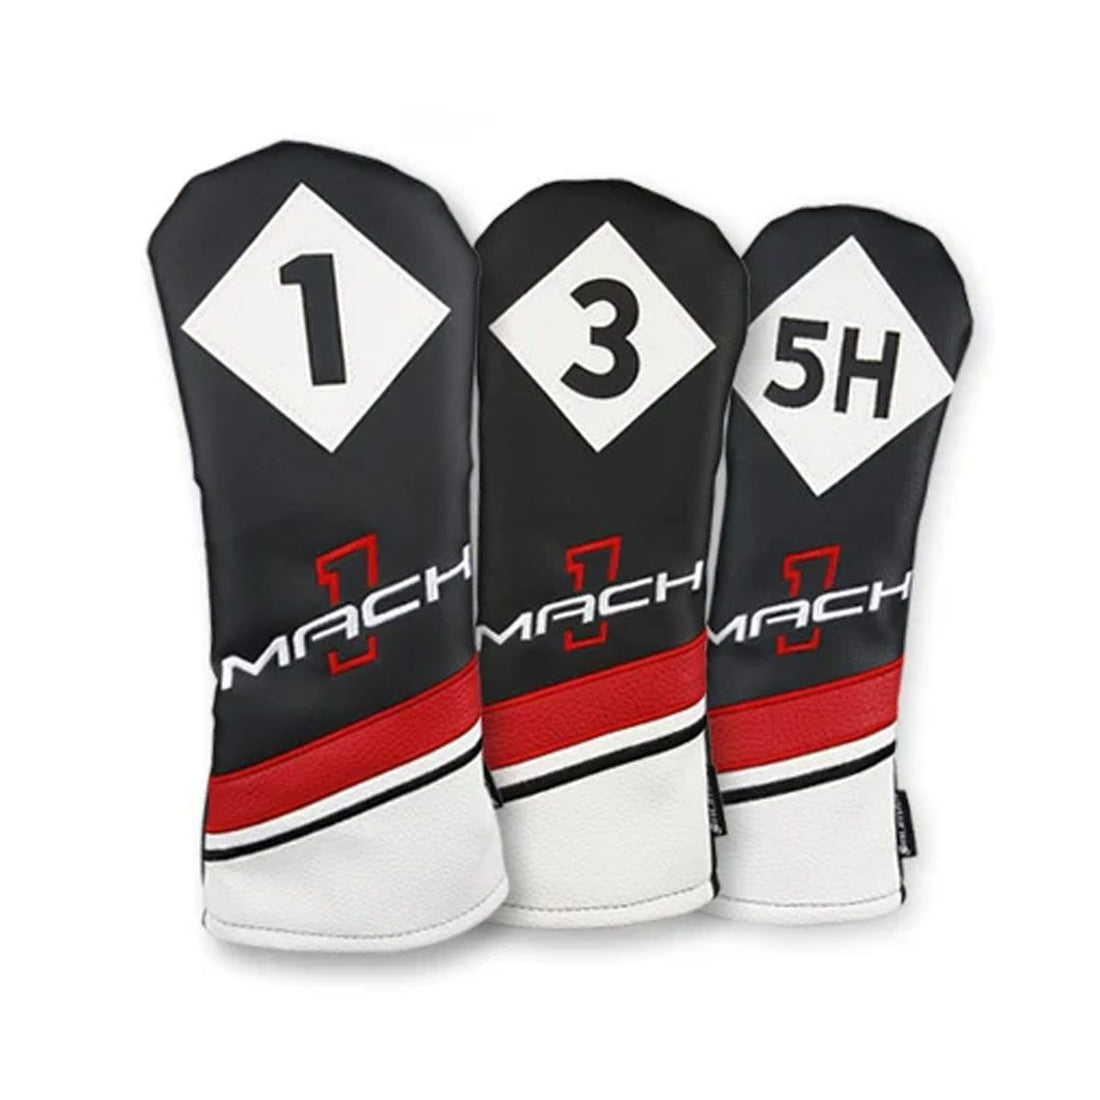 black, red and white Mach 1 driver, 